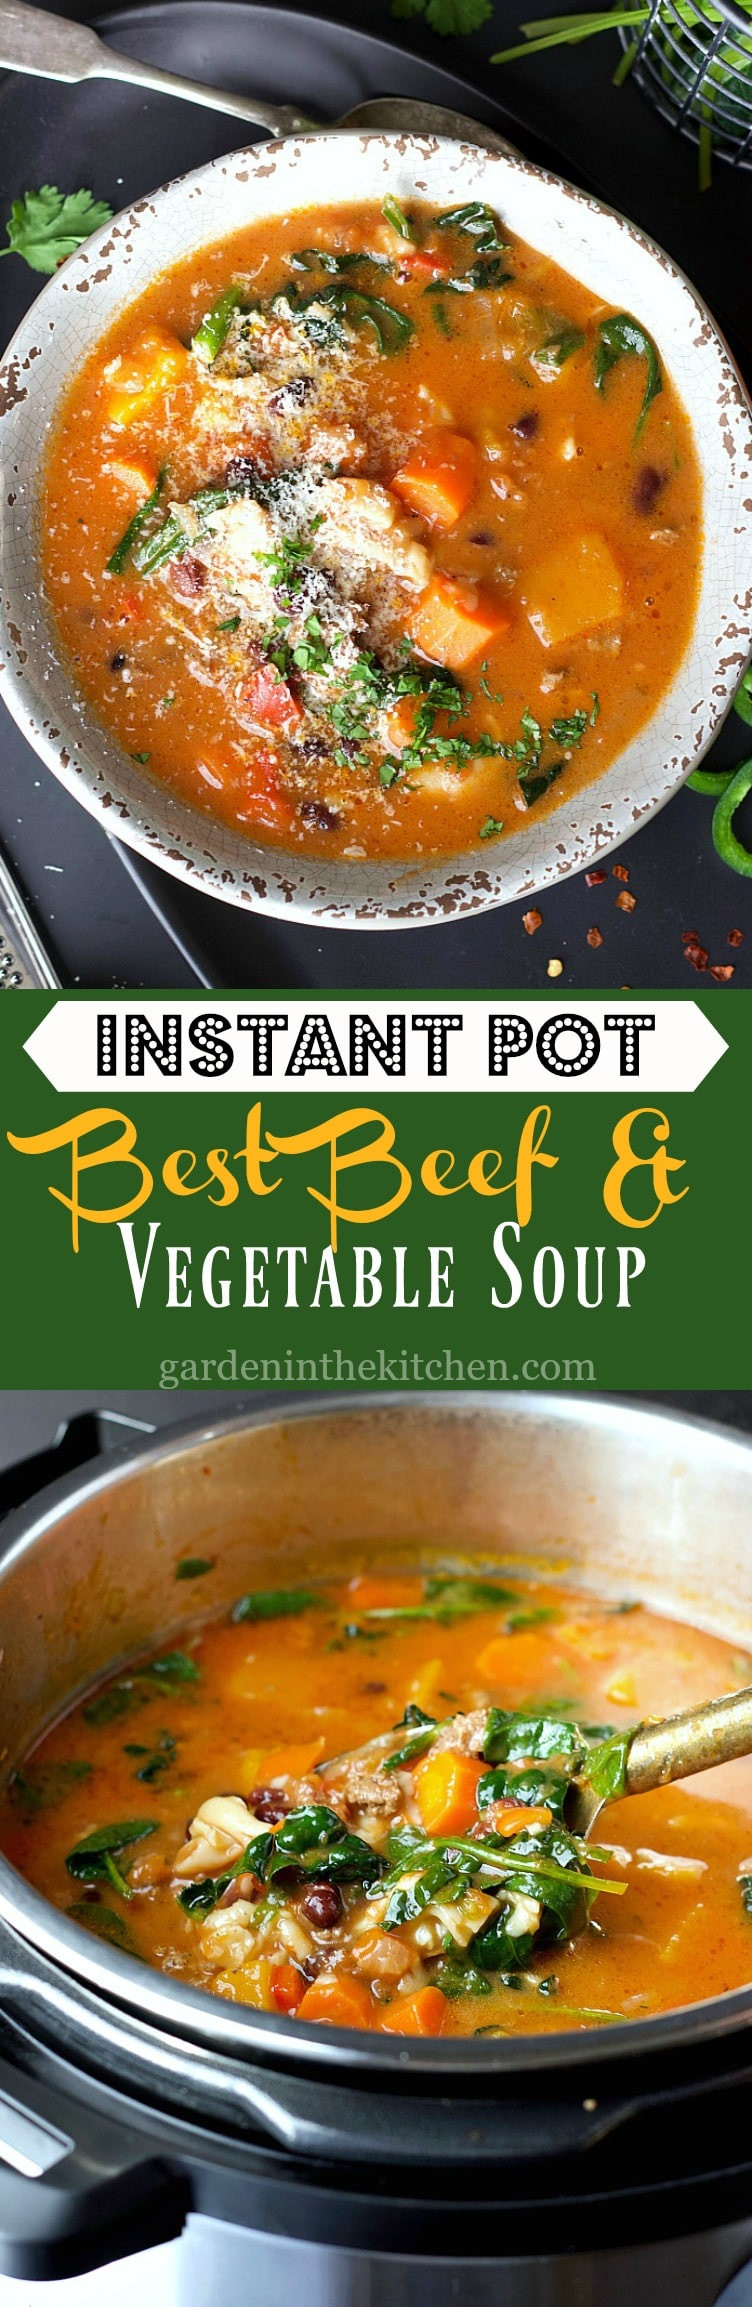 Beef Vegetable Soup Instant Pot
 Instant Pot Beef and Ve able Soup